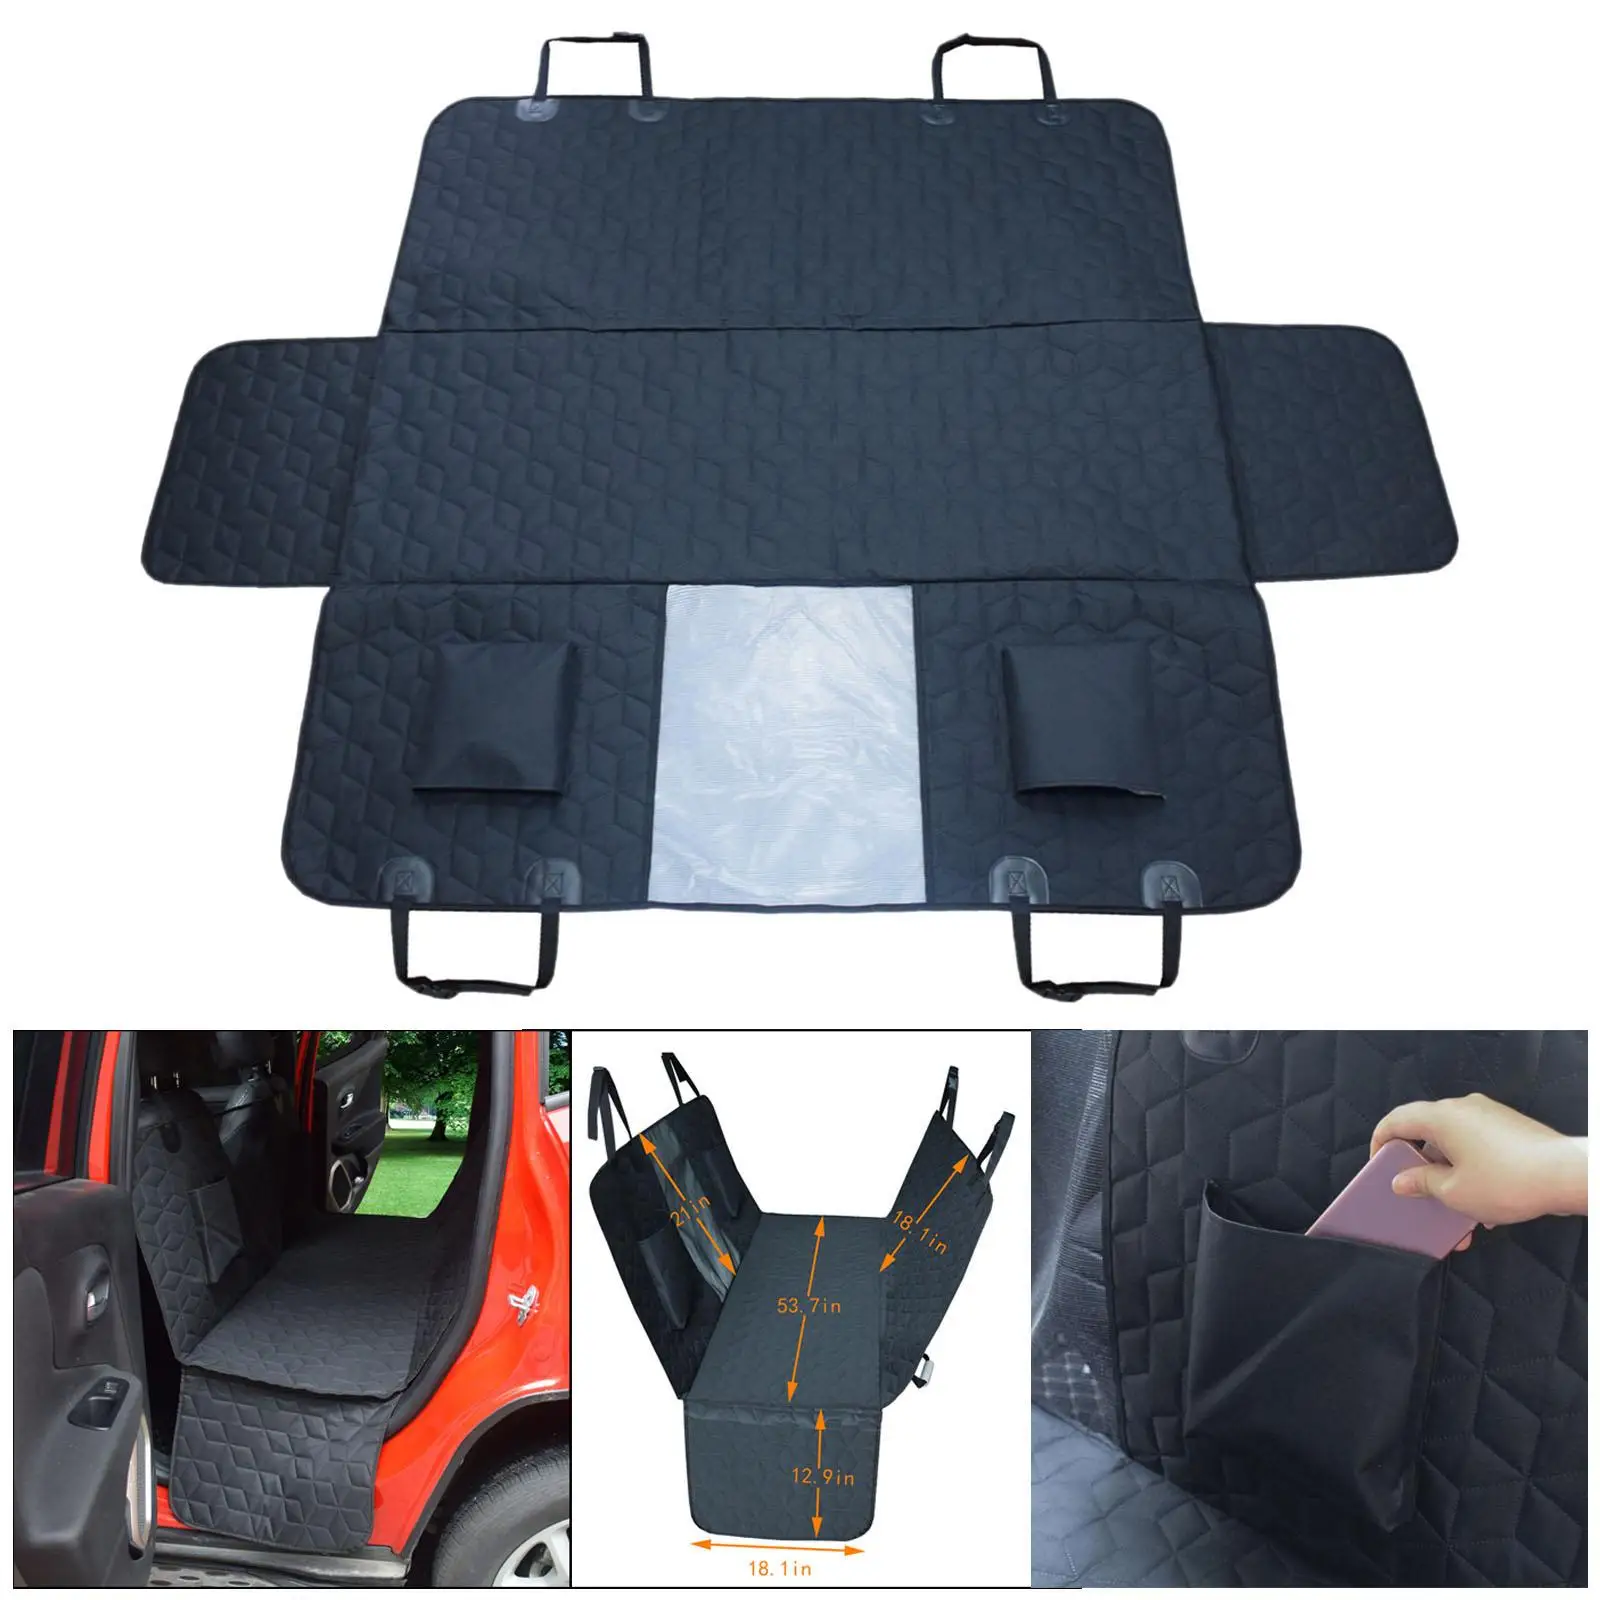 Dog Car Seat Covers Waterproof Big Mesh Window Scratch Resistant Dog Hammock Backseat Protector Truck SUV Durable Pet Seat Cover